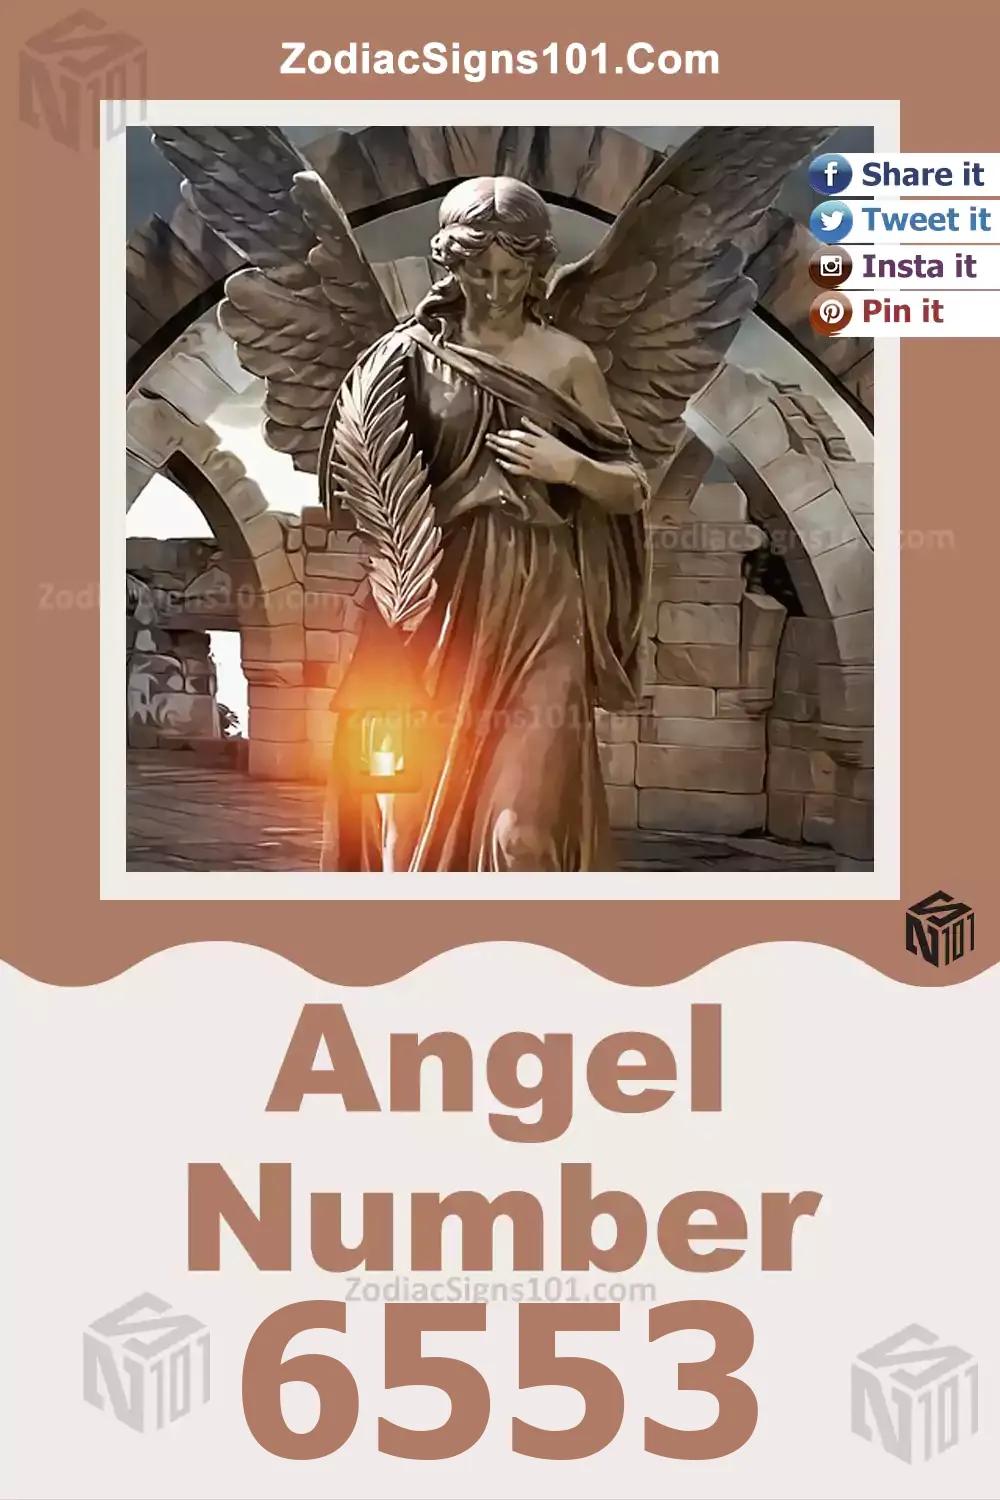 6553 Angel Number Meaning